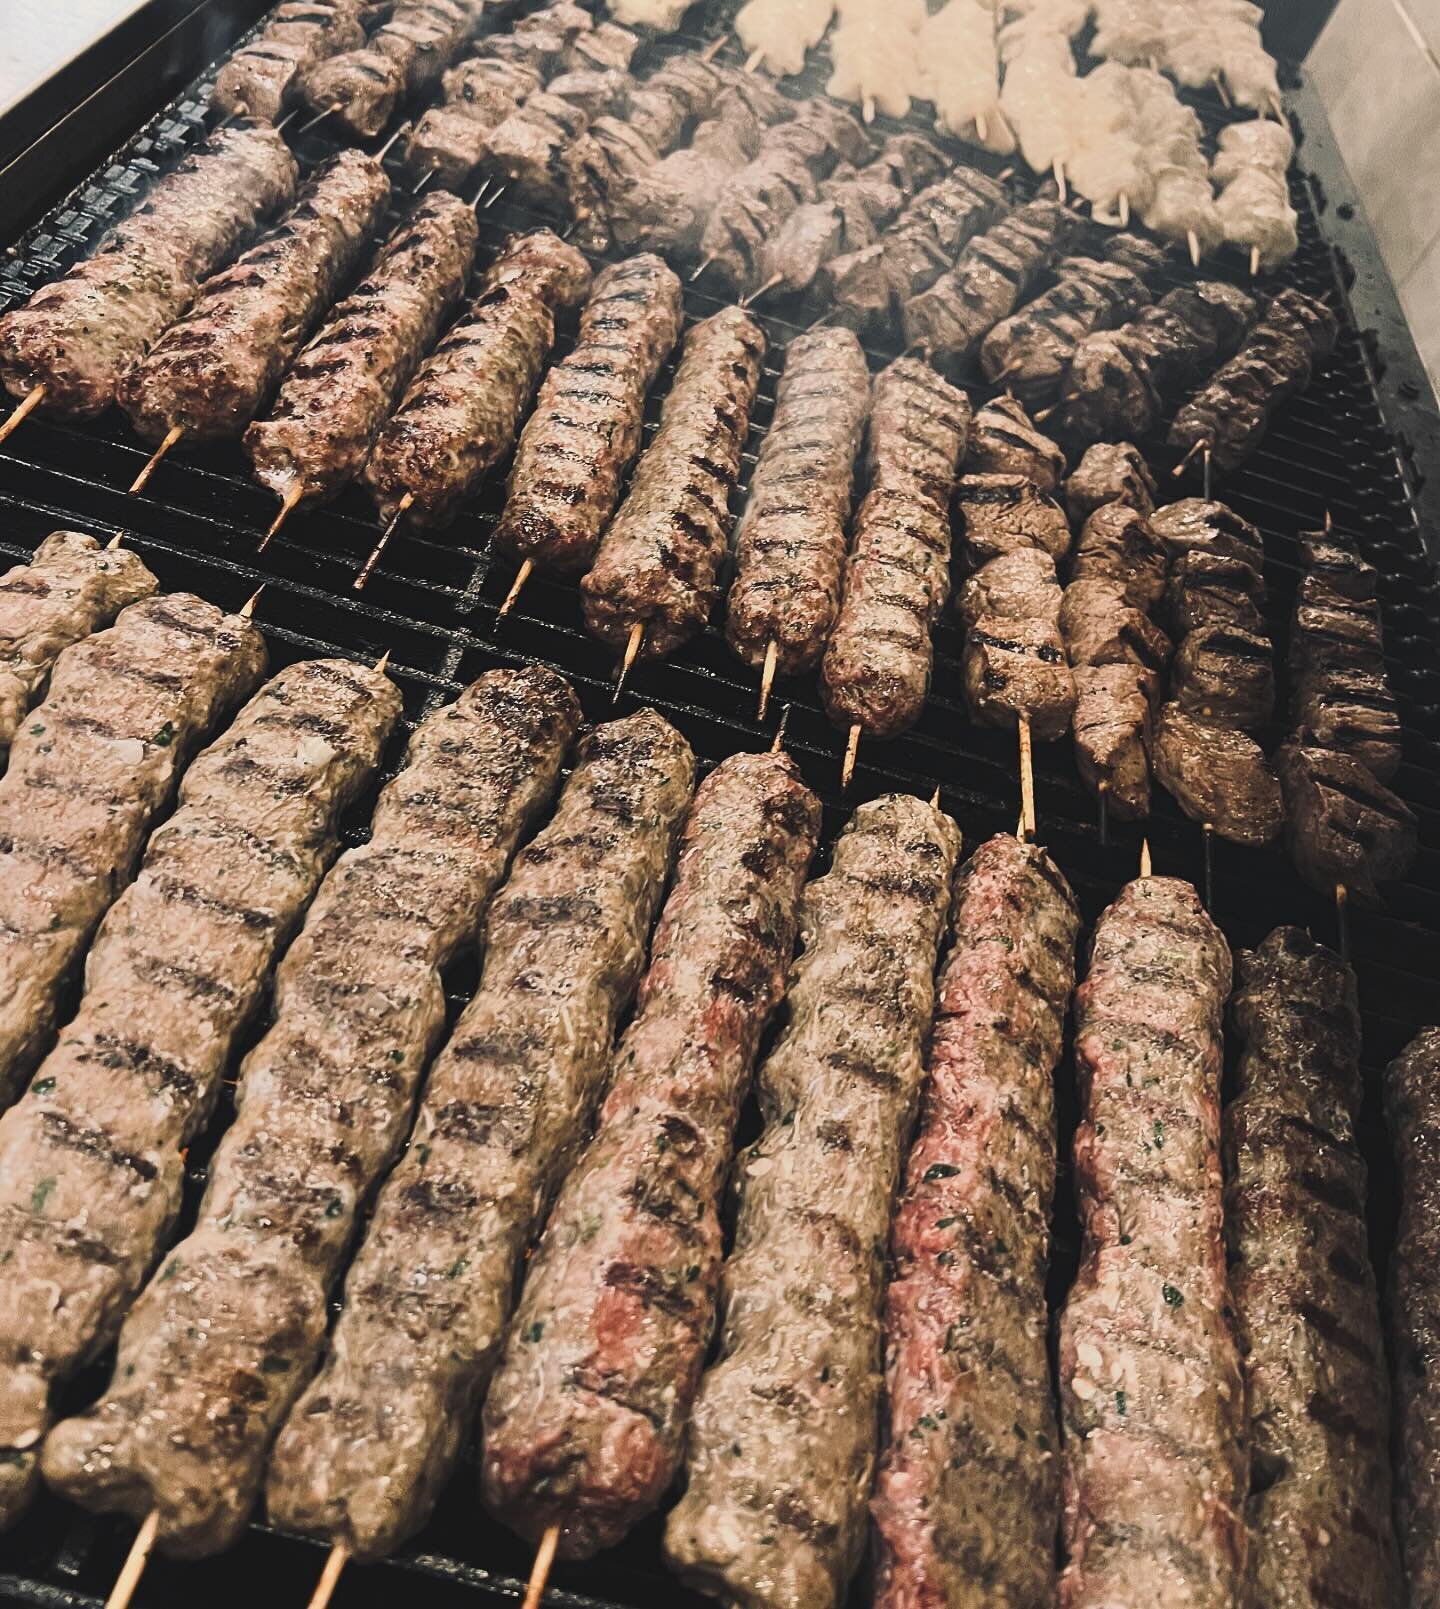 The grill is sizzlin&rsquo;! Join us tonight for your favorite Kabobs! Our selection of Kafta, Filet, Chicken, Shrimp, &amp; Vegetable Kabobs are made to order and are accompanied by our Basmati Rice. See you tonight!

Reservations recommended, walk-